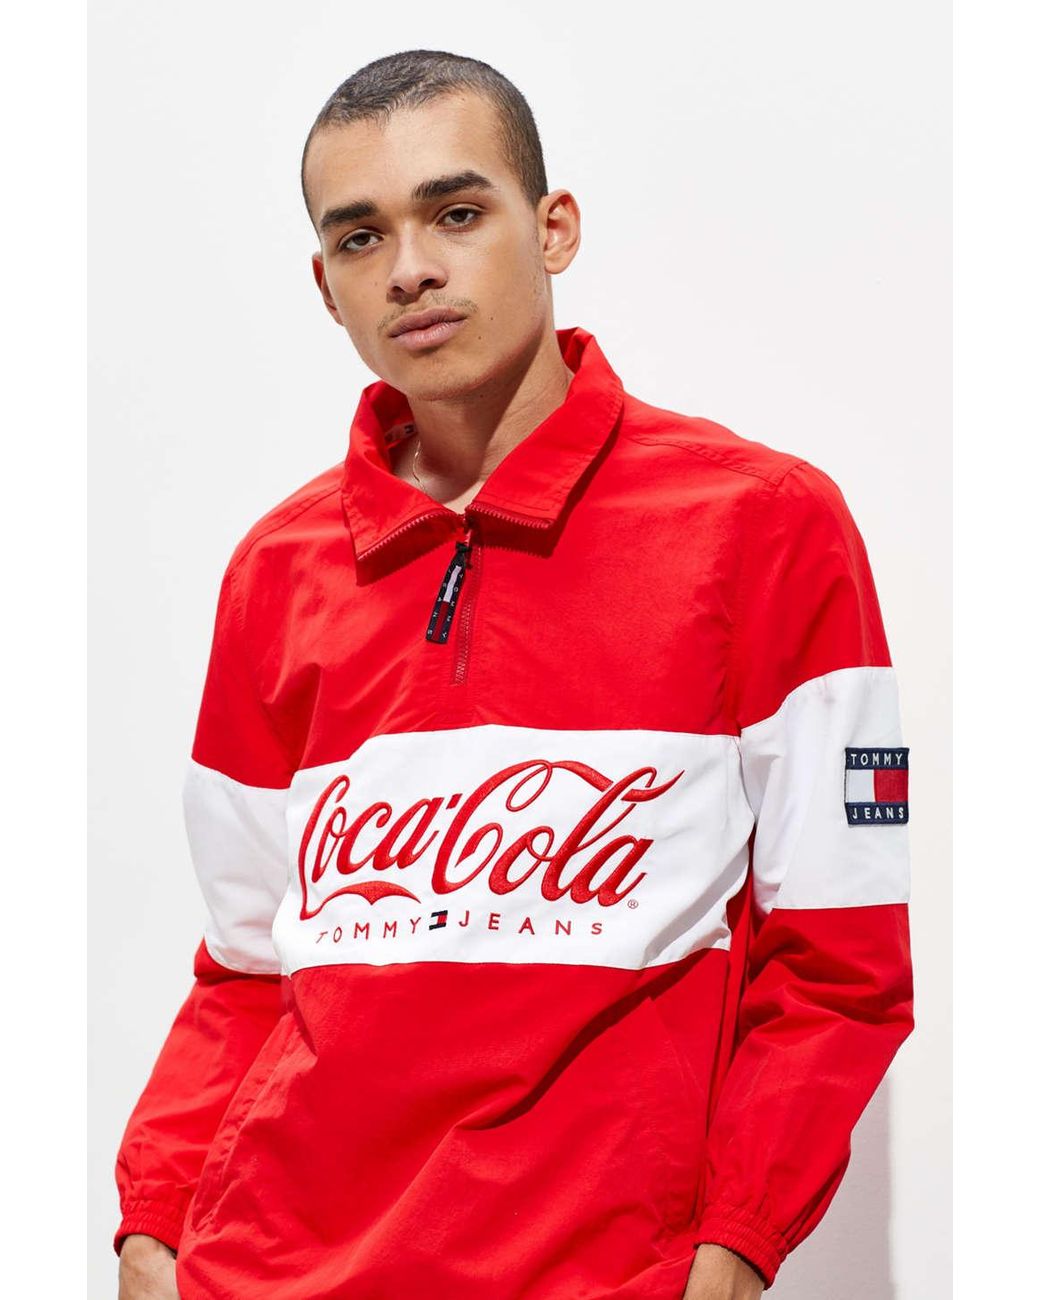 Tommy Hilfiger Coca-cola Jacket in Red for | Lyst